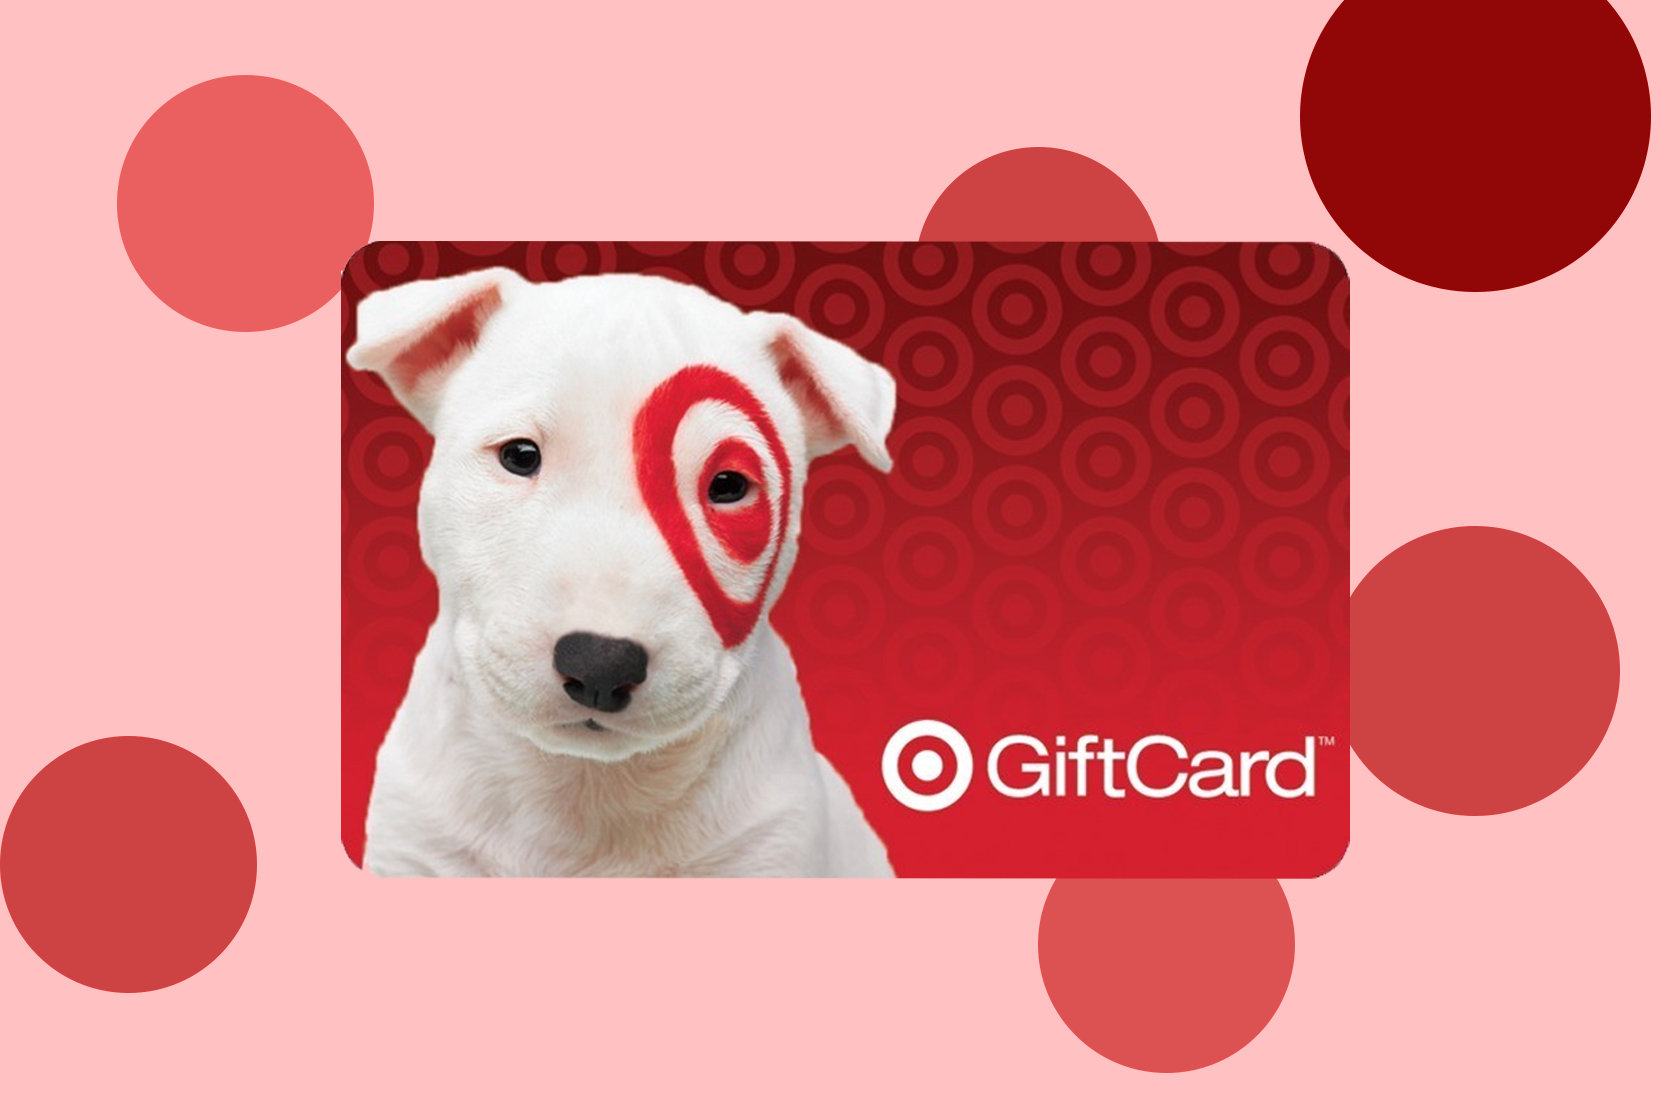 Target gift cards are 10 off ahead of their largest sales event of the